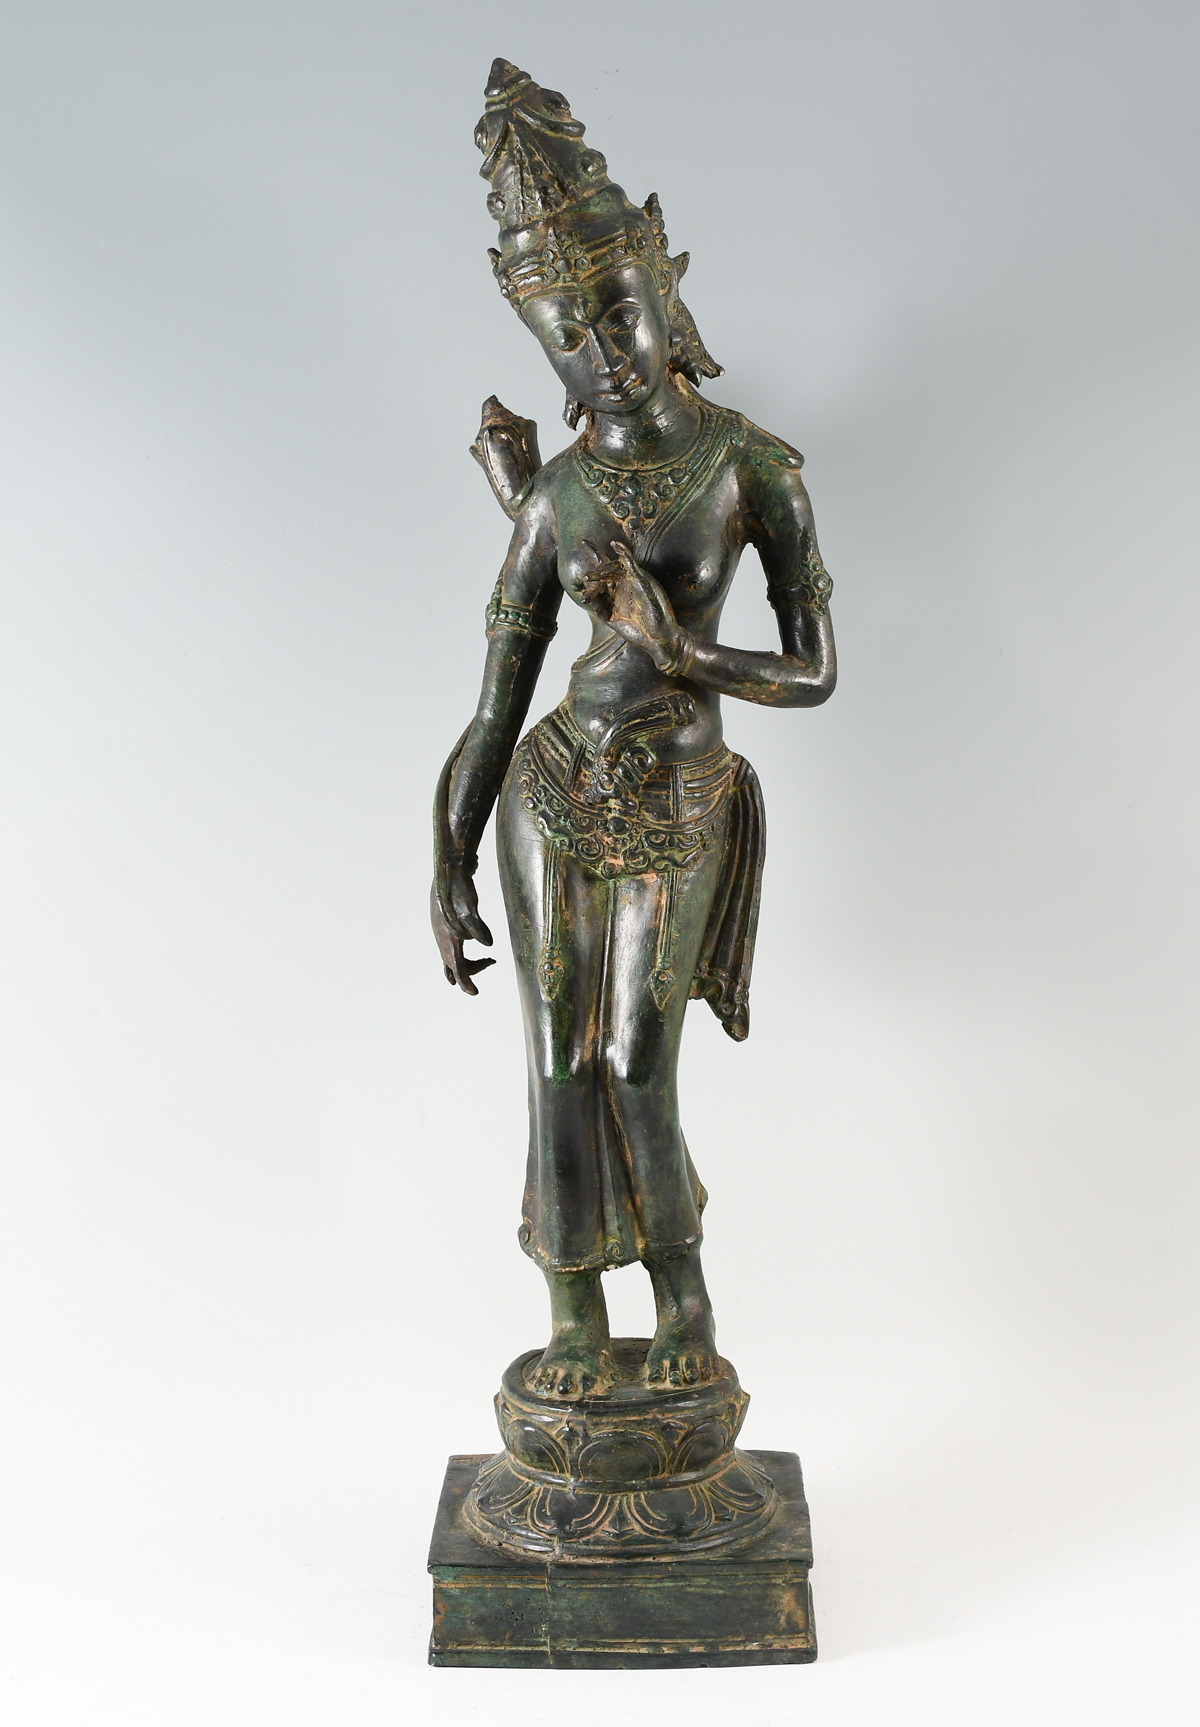 18TH-CENTURY BRONZE MIDDLE EASTERN